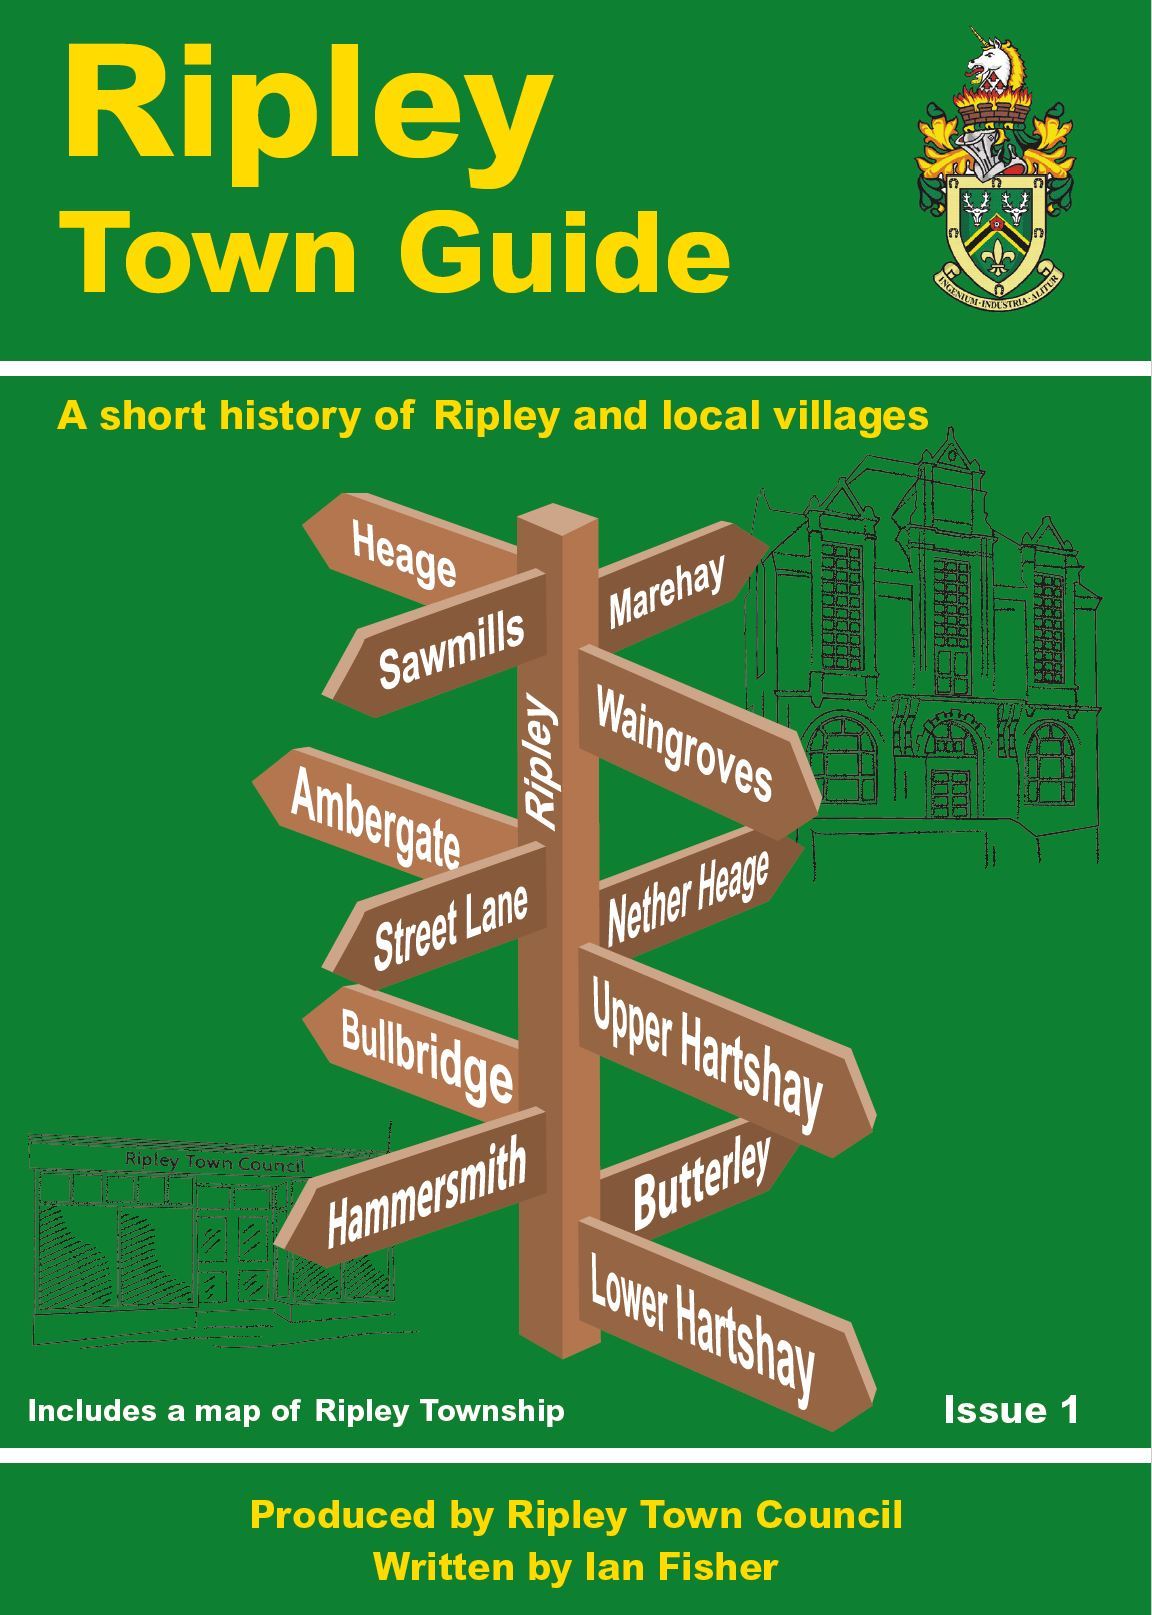 Ripley Town Guide a short history of Ripley and local villages produced by Ripley Town Council